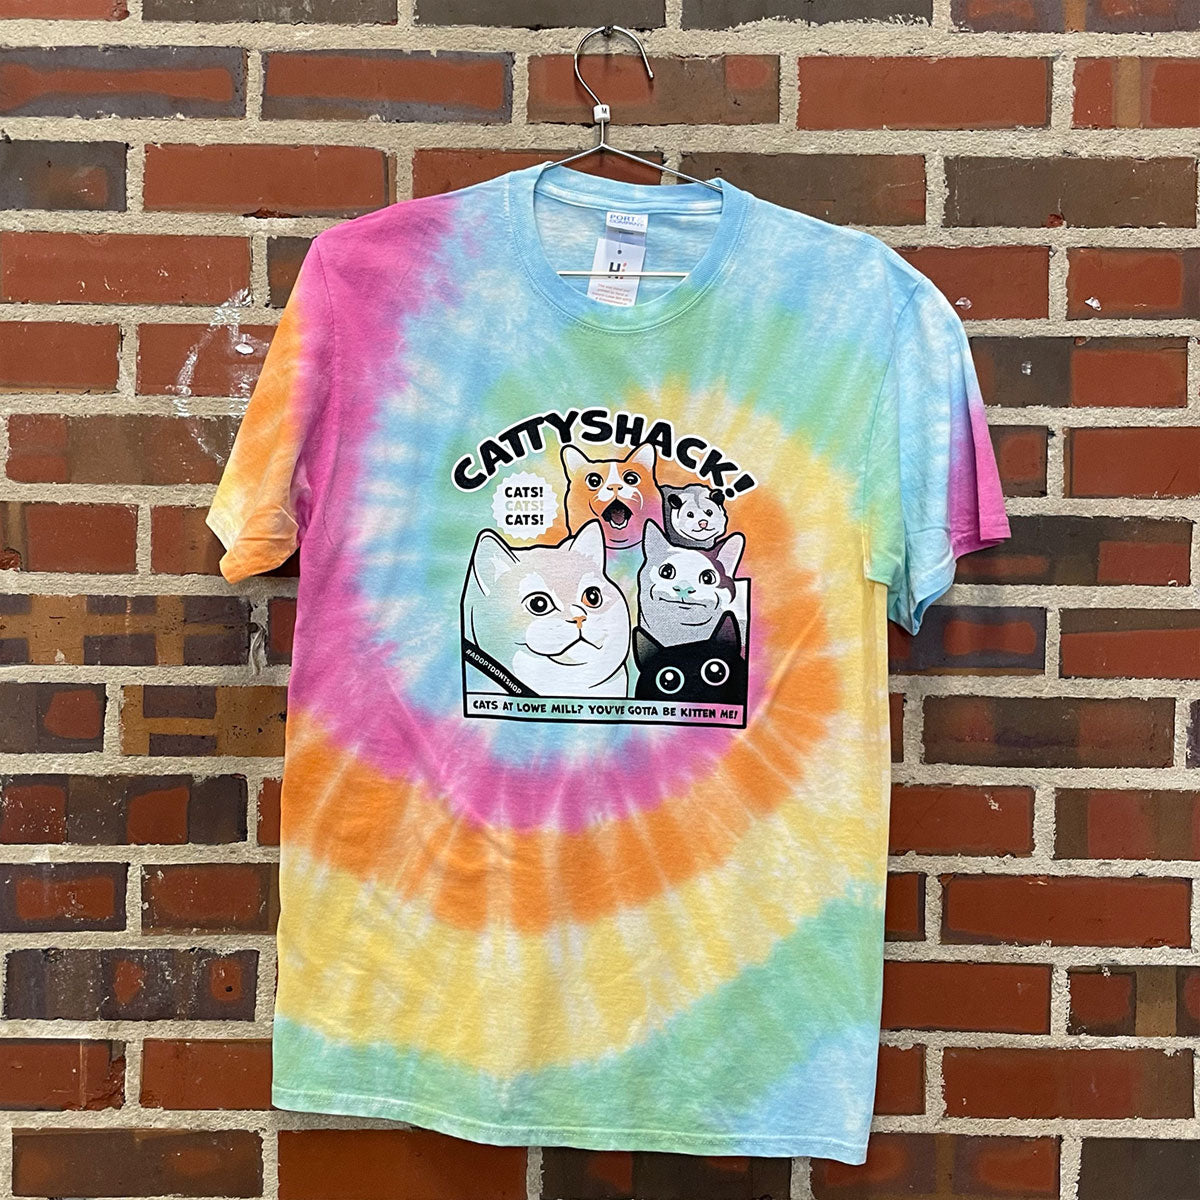 A tie dye t-shirt with famous internet cats advertising "cattyshack"